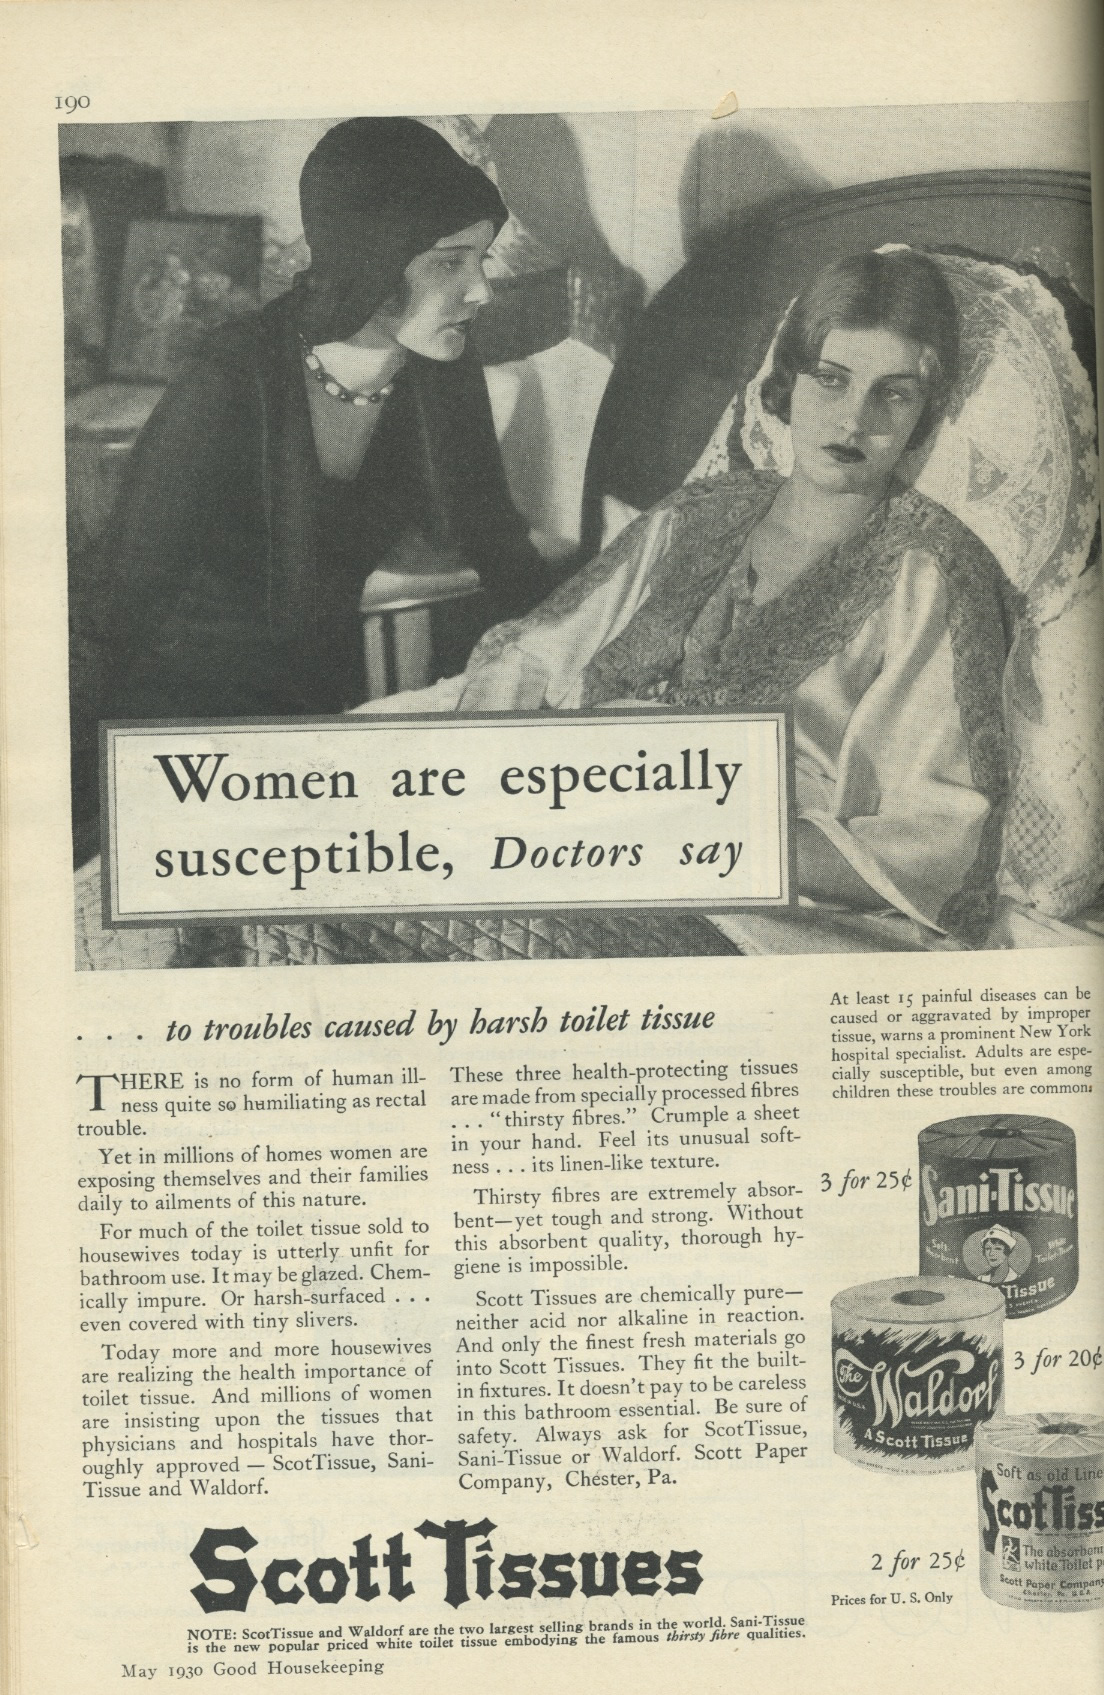 1930 Good Housekeeping Ad for Scott Tissue touting the benefits for women of the product